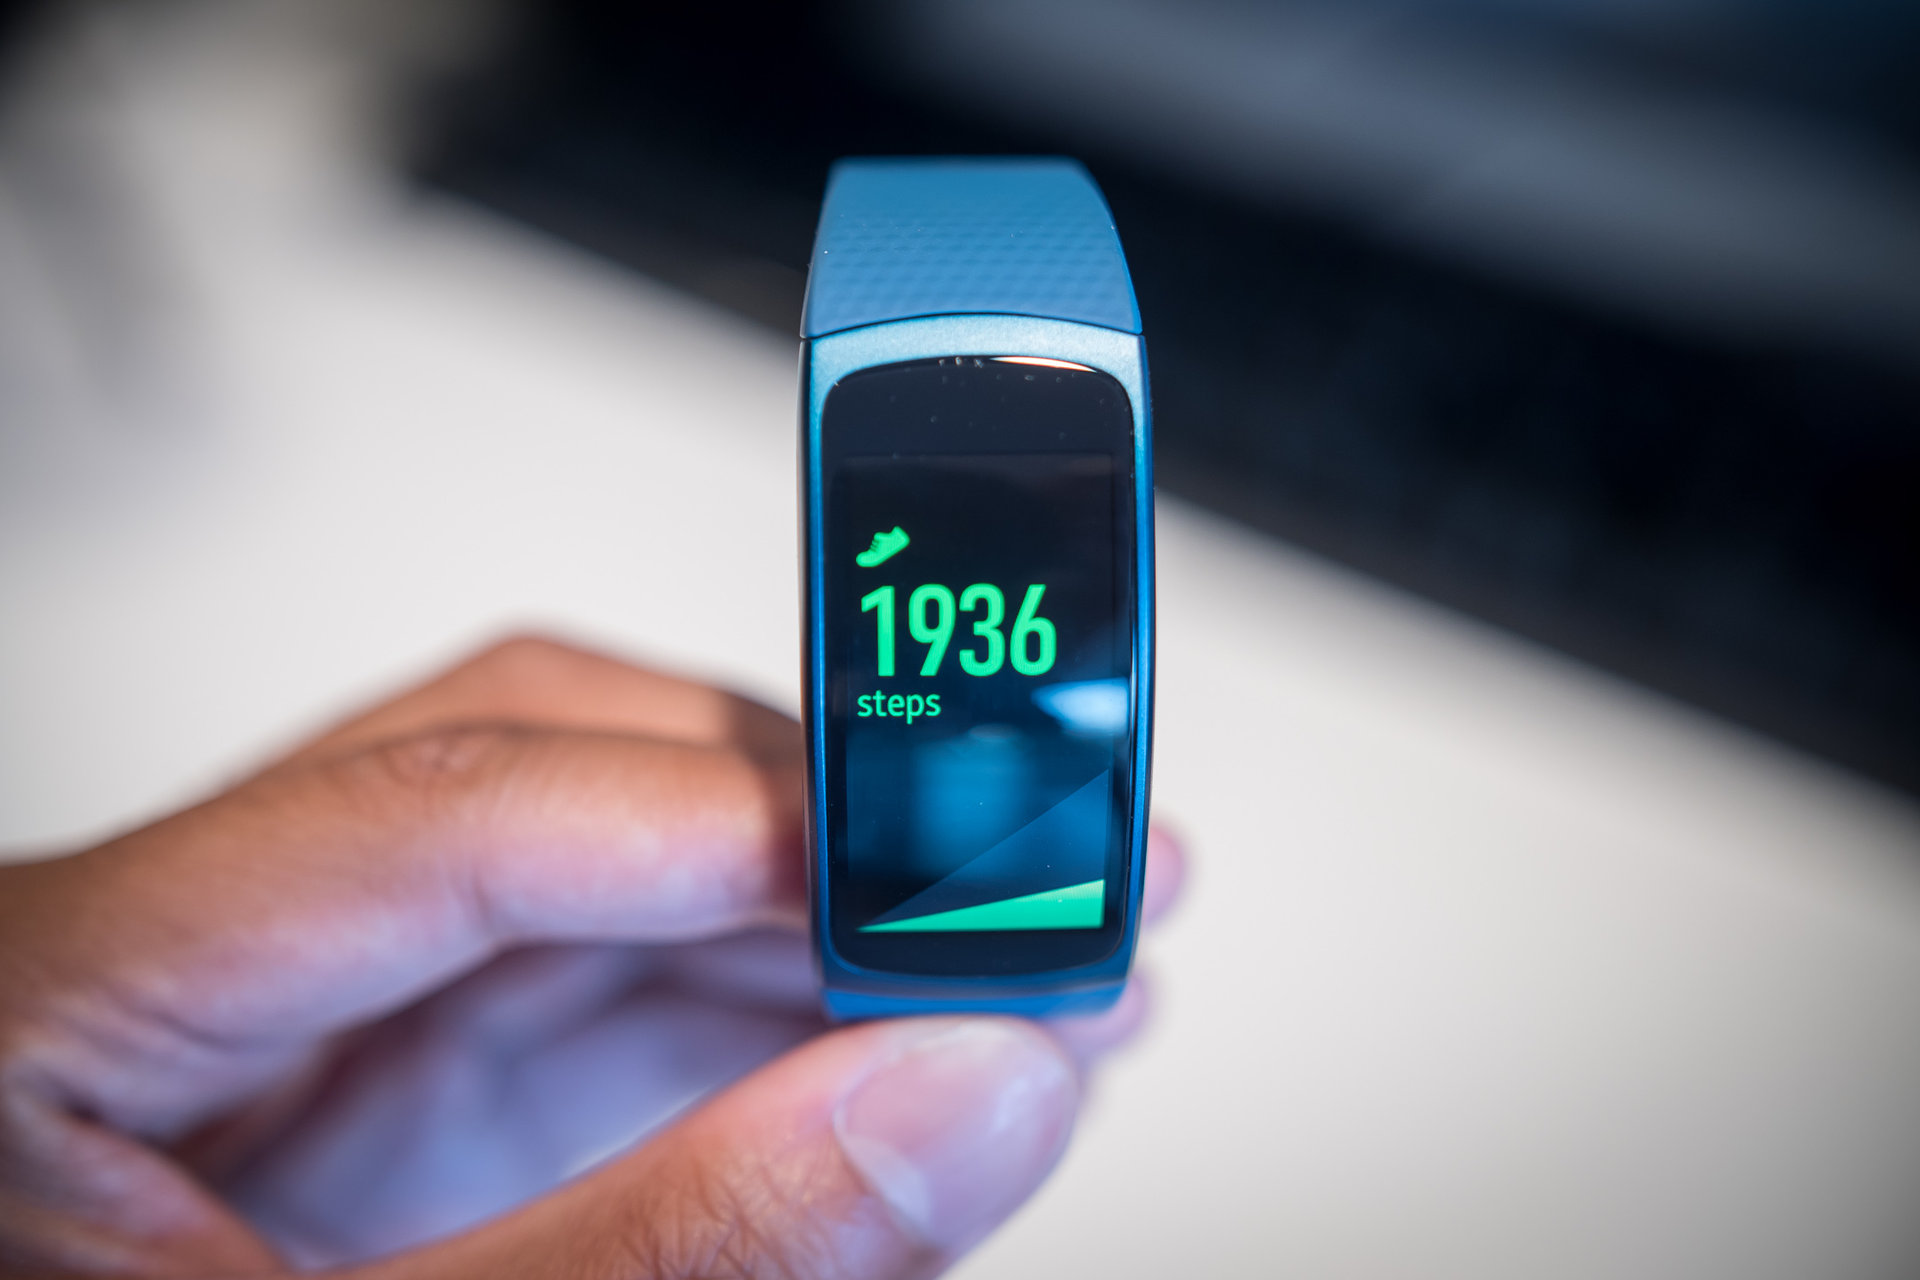 samsung gear fit 2 review aa (18 of 26)